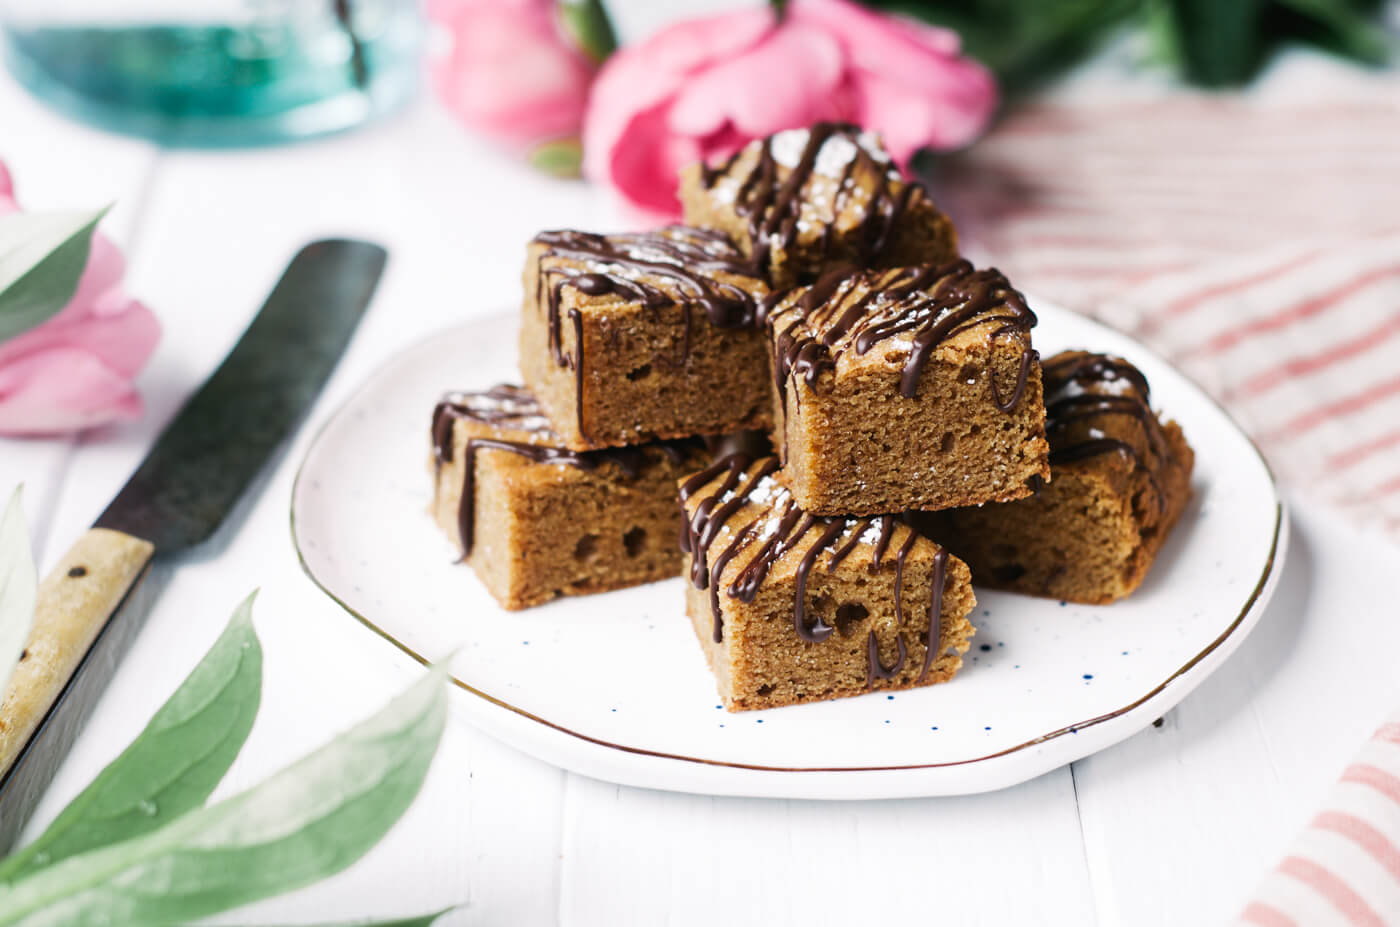 This Paleo dessert snack cake is so incredibly moist and practically melts in your mouth. Tastefully drizzled with lushes chocolate sauce, this grain free dessert makes a perfect snack for those sweet tooth cravings.